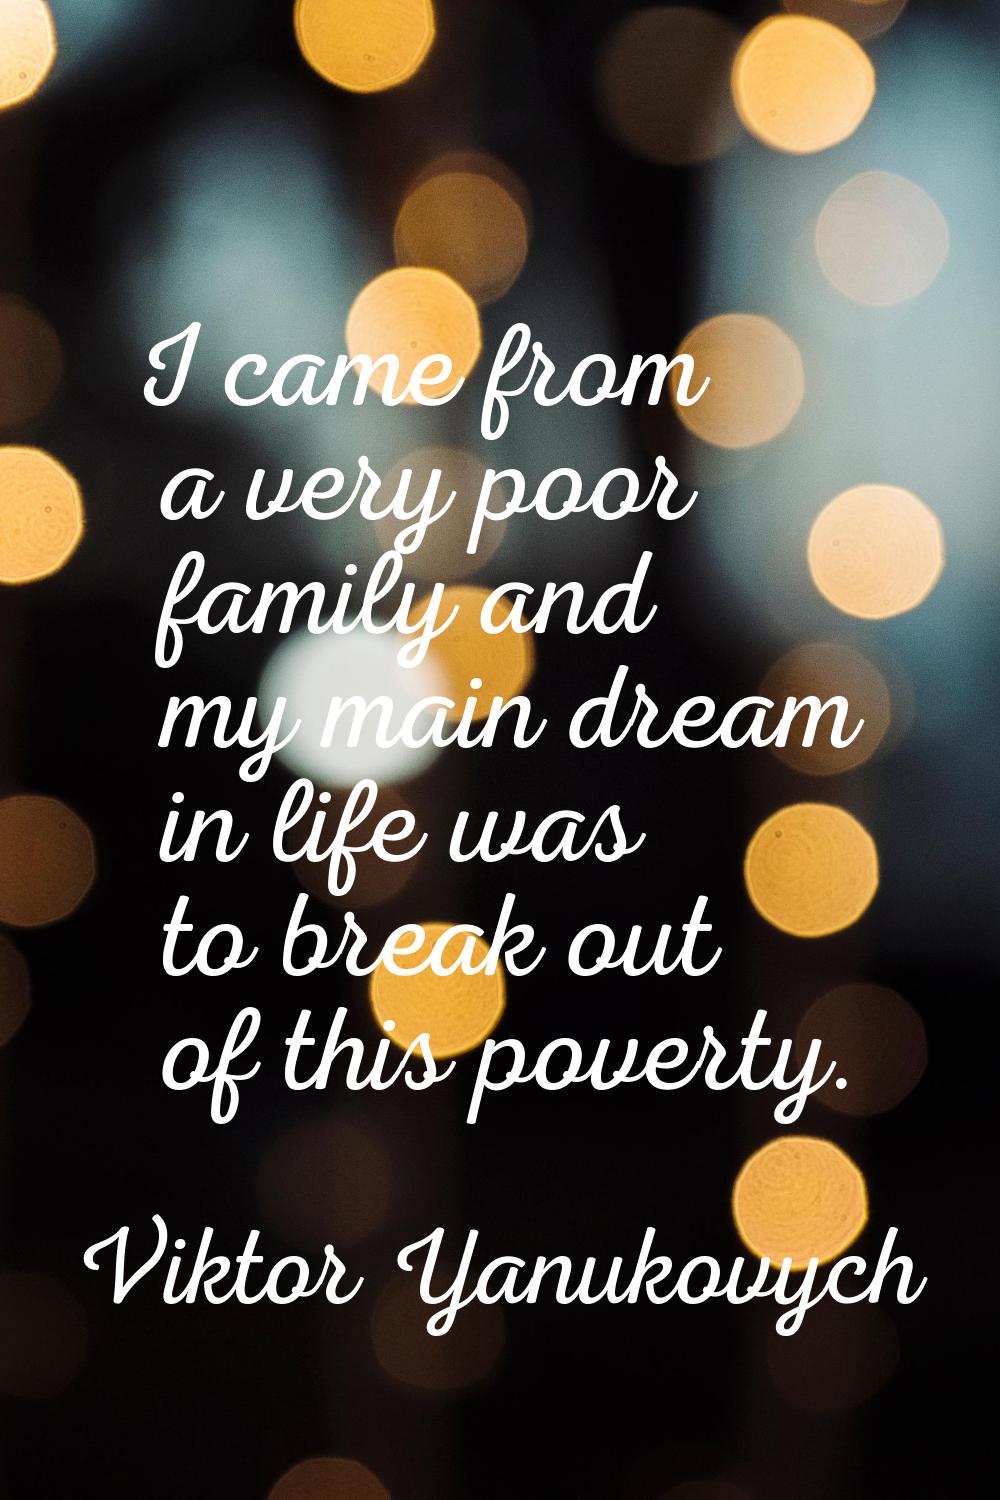 I came from a very poor family and my main dream in life was to break out of this poverty.